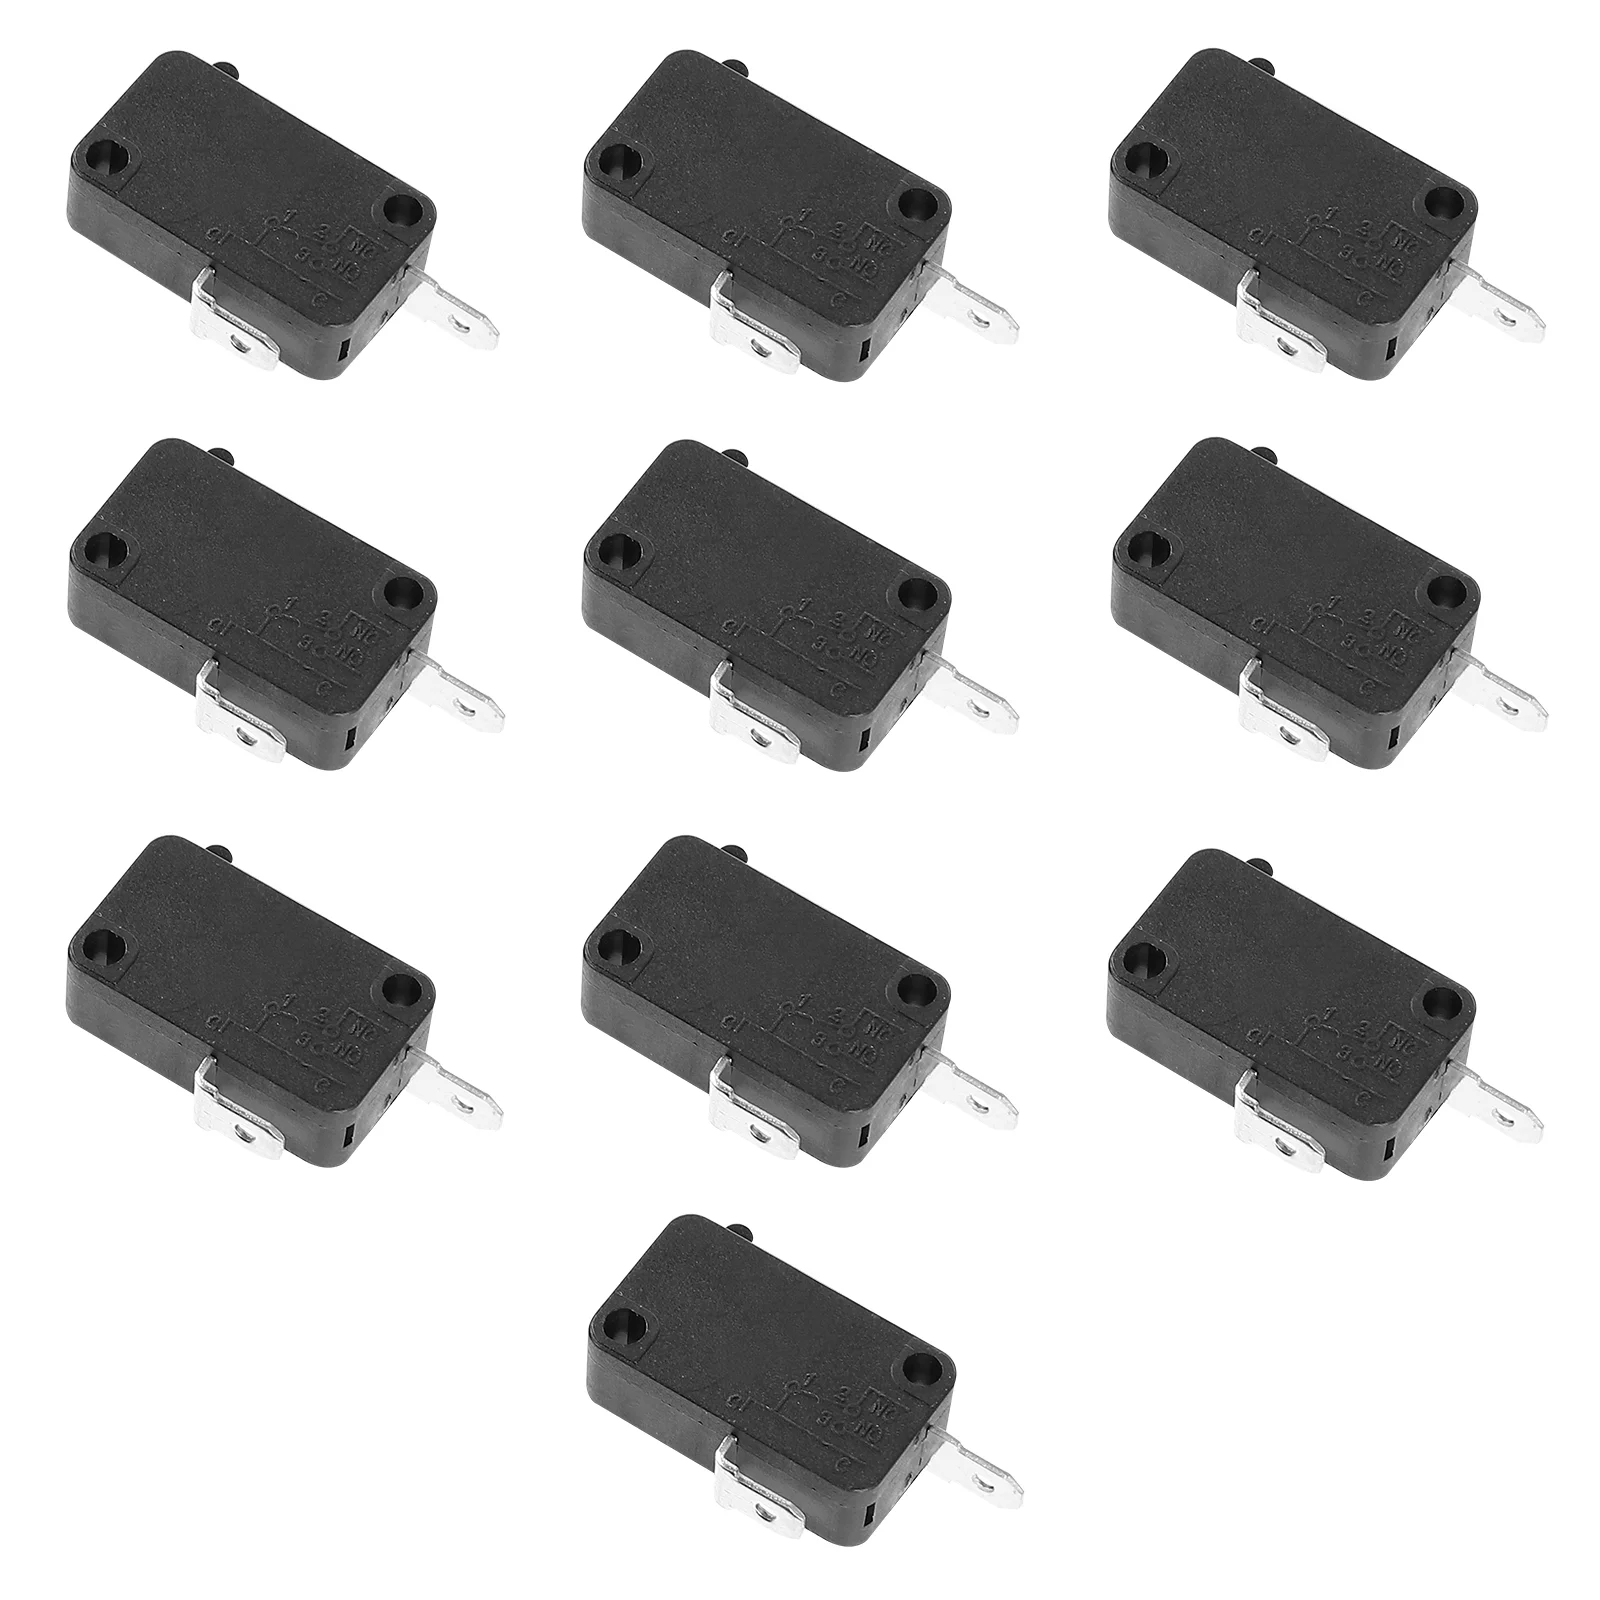 

10 Pcs 2 Pin Limit Switch Position Snap Buttons Door Micro 16a Rice Cooker Microwave Appliance Normally Open SPDT Action